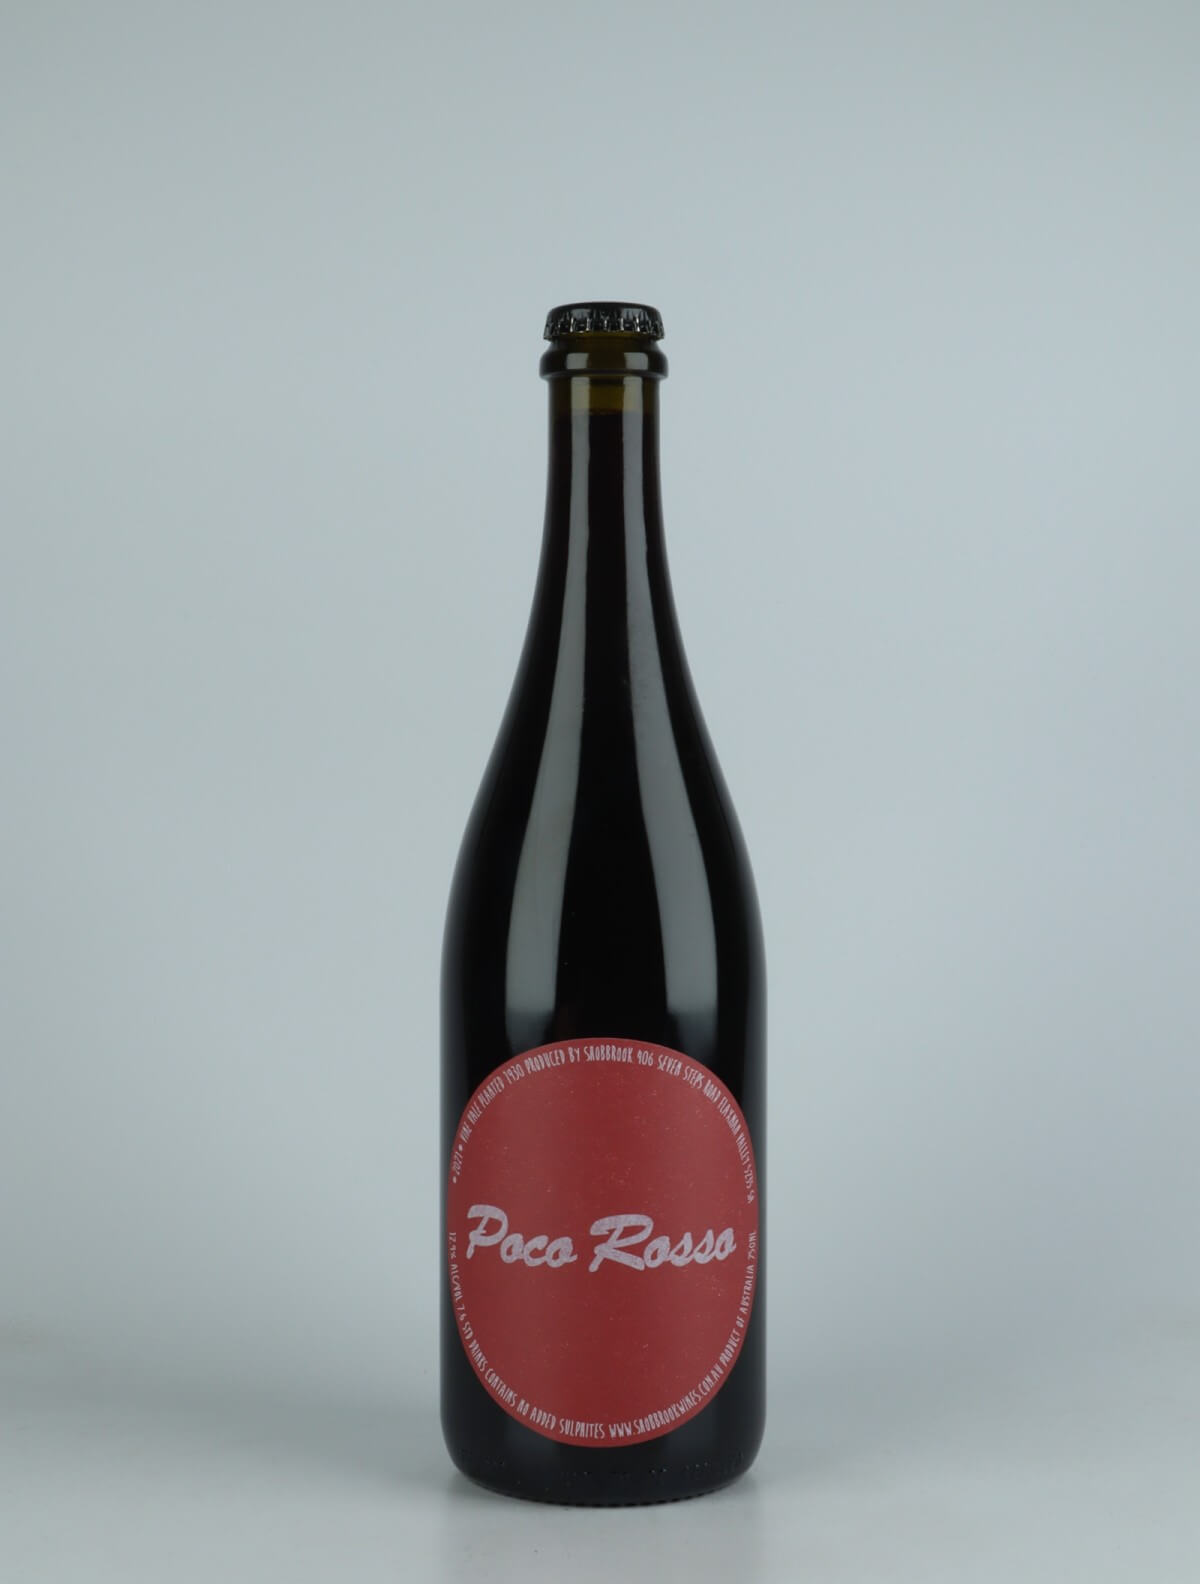 A bottle 2021 Poco Rosso Red wine from Tom Shobbrook, Barossa Valley in Australia